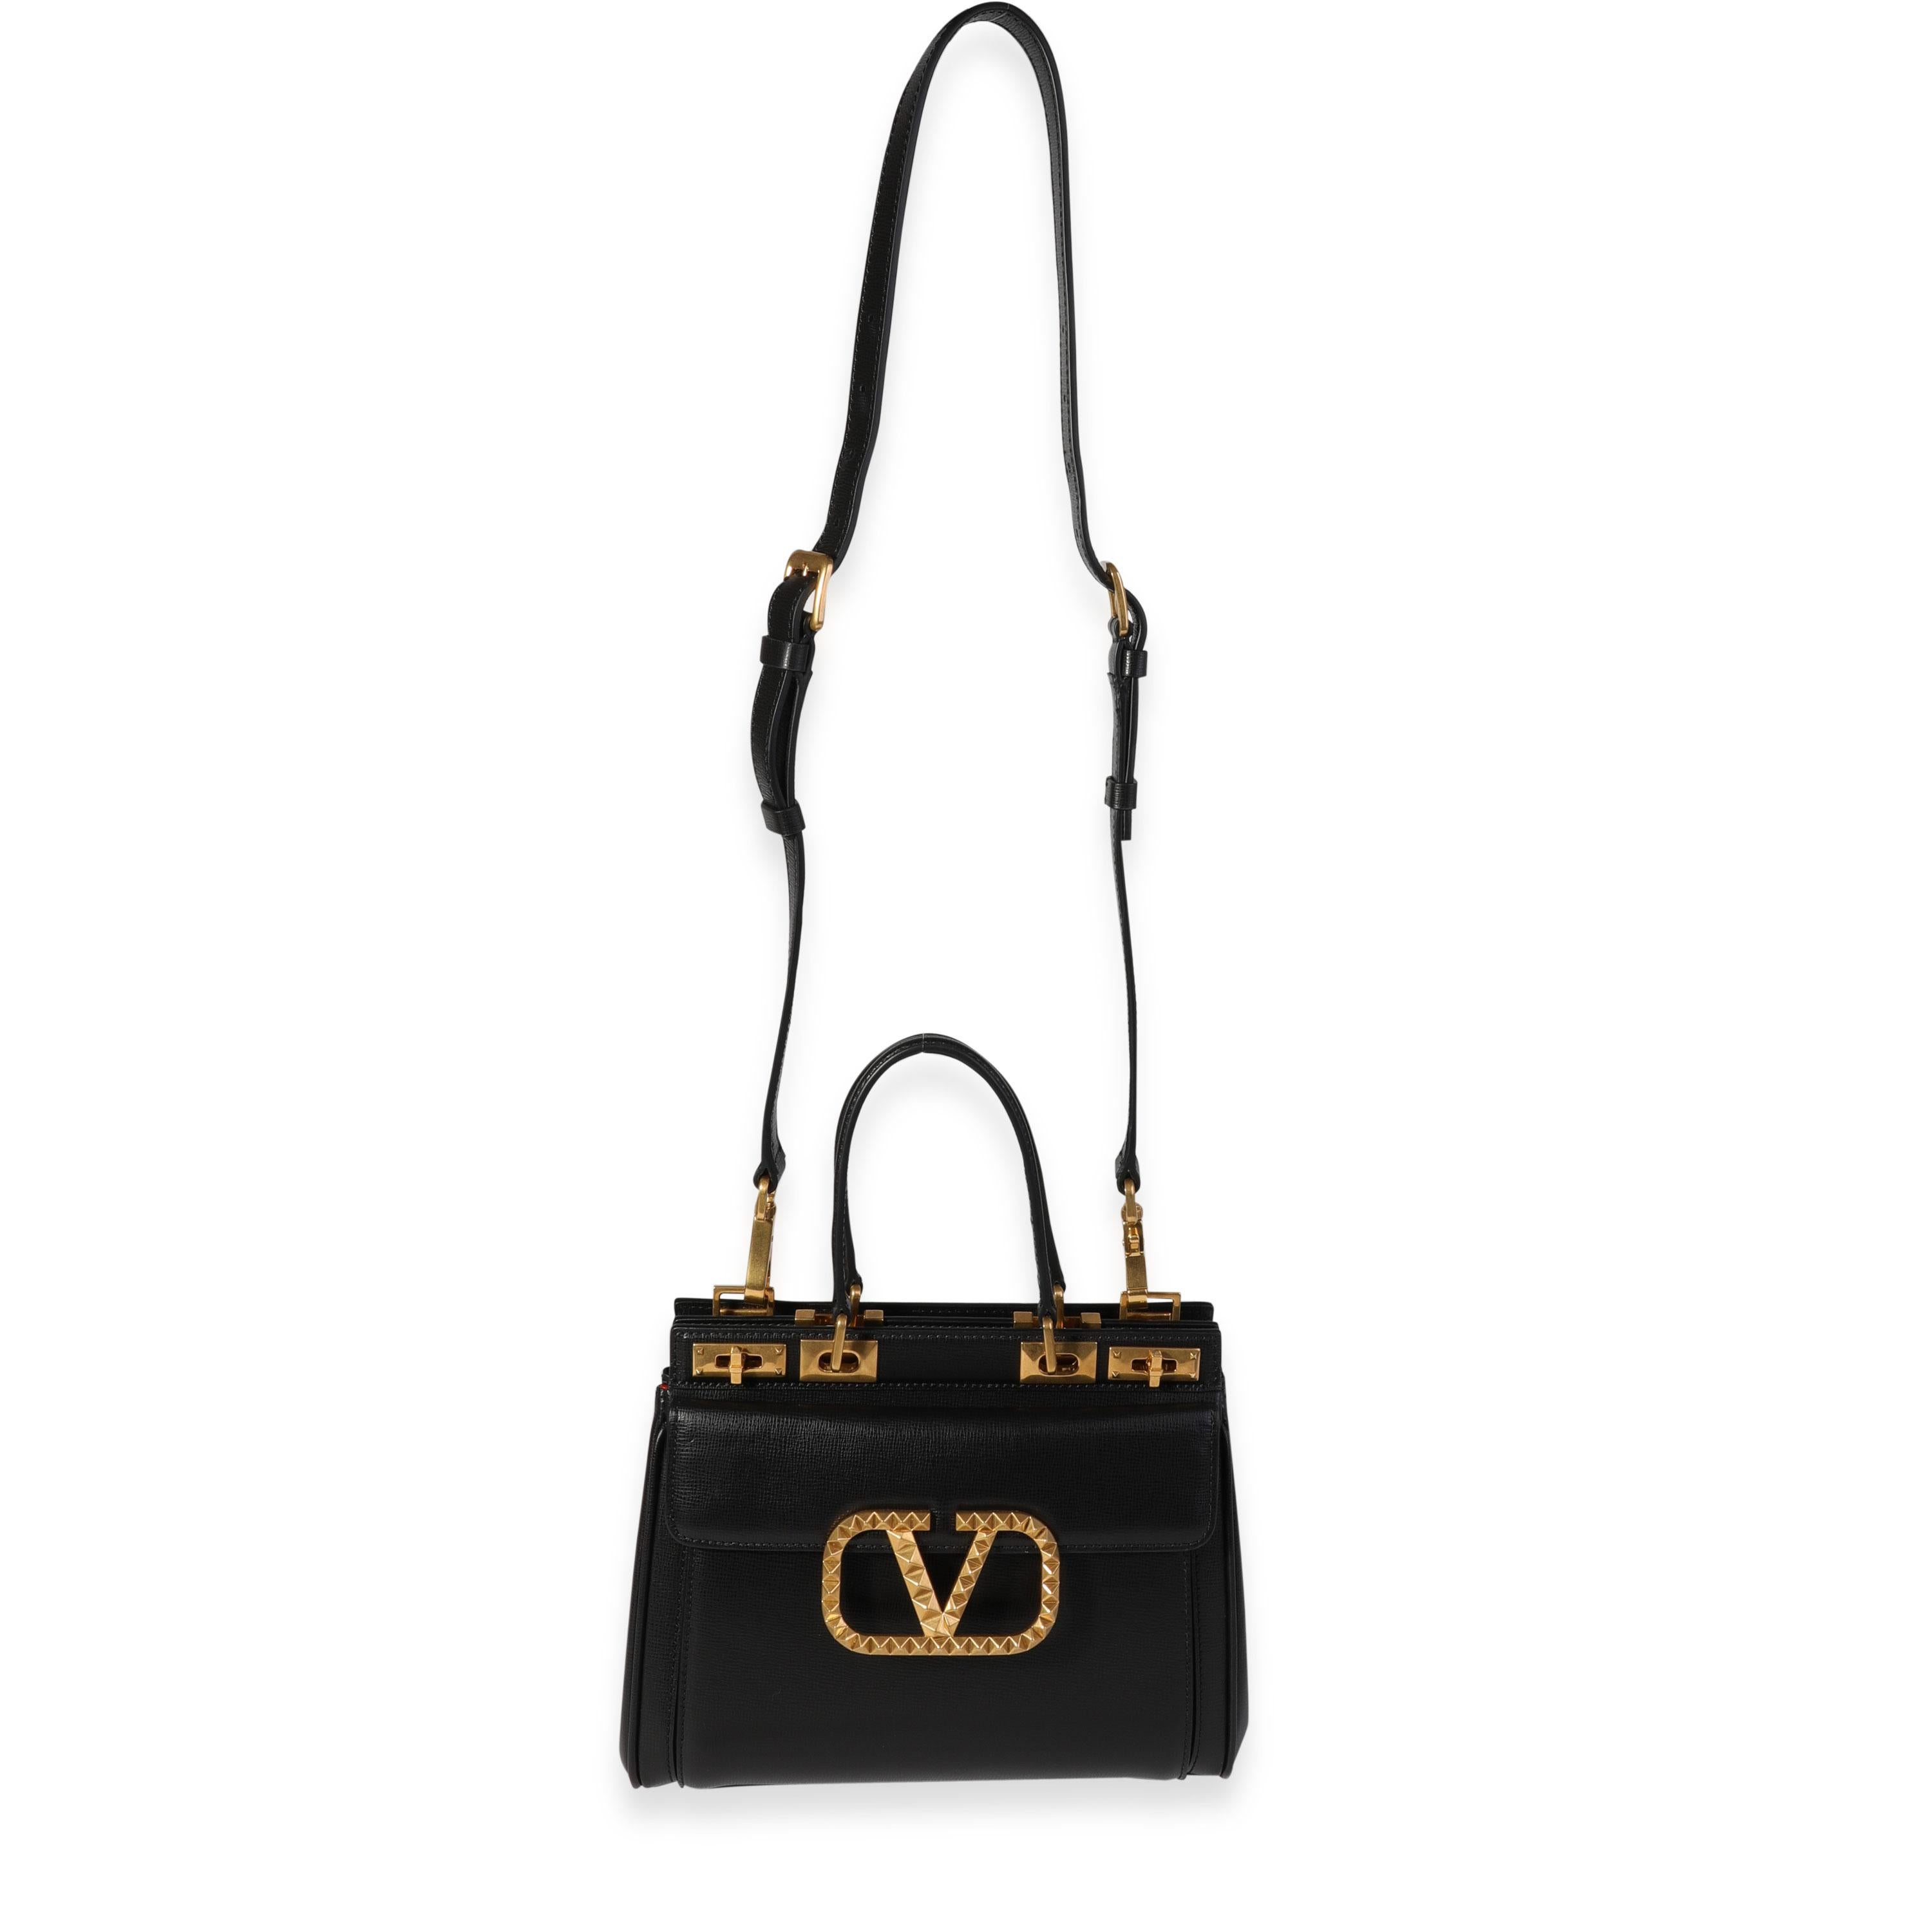 Listing Title: Valentino Alcove Black Grainy Calfskin Small Rockstud Bag
SKU: 120462
MSRP: 3790.00
Condition: Pre-owned 
Handbag Condition: Excellent
Condition Comments: Excellent Condition. No visible signs of wear.
Brand: Valentino
Model: Rockstud